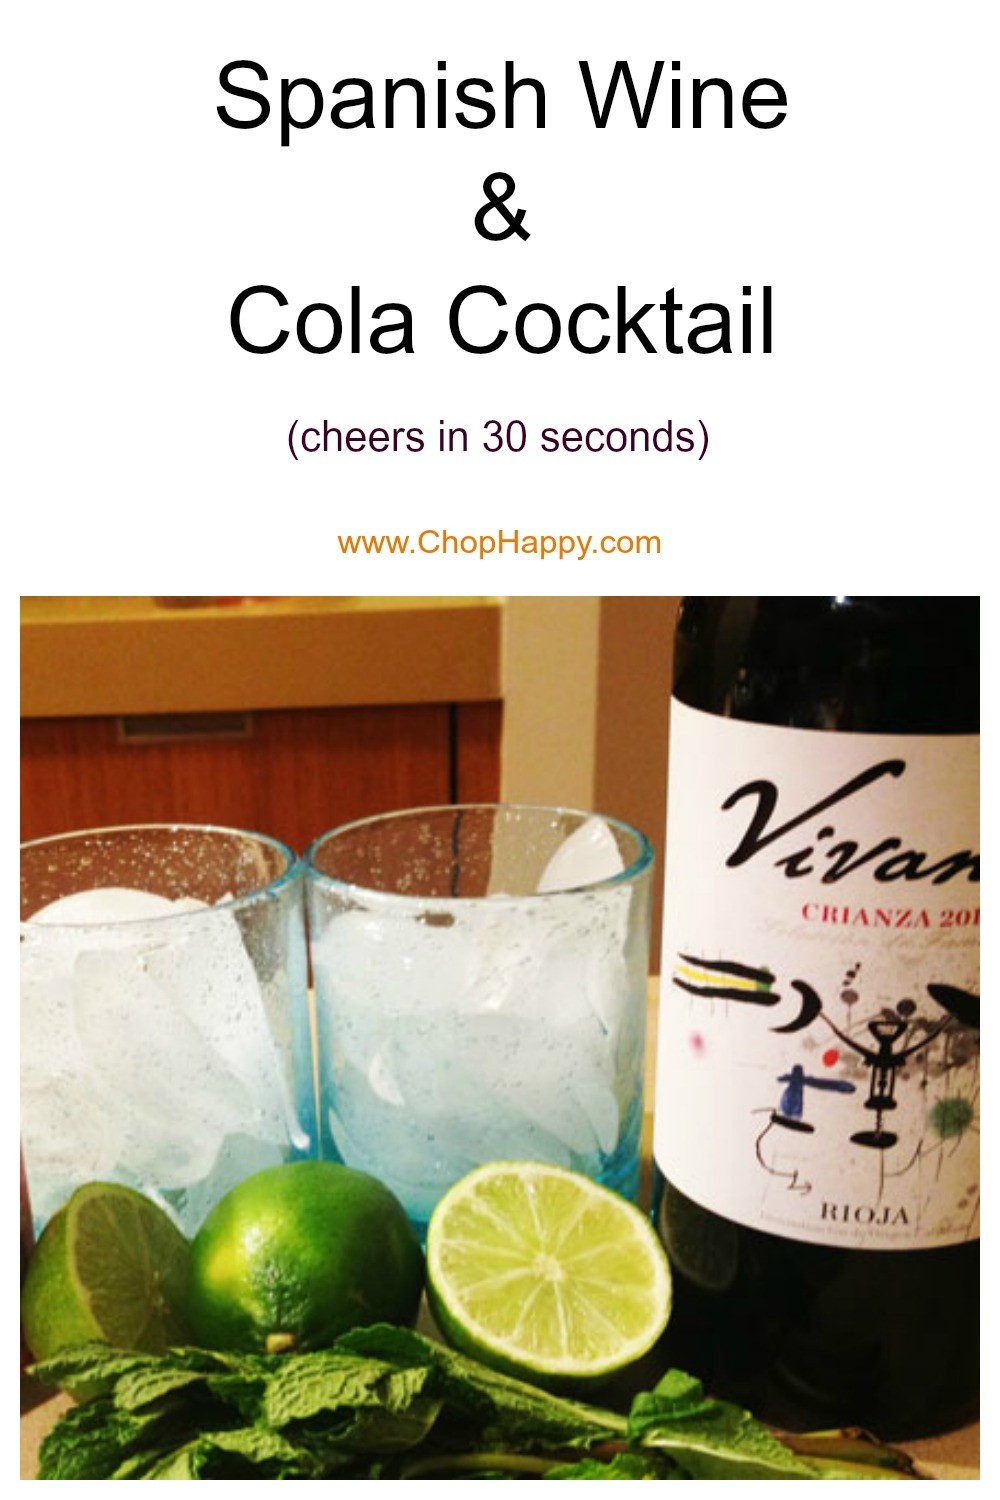 Spanish Wine and Cola Cocktail. Grab wine, soda, and citrusy lime. This is super easy Spanish recipe! Happy Cocktail making! www.ChopHappy.com #cocktailrecipe #spanishdrinkrecipe 